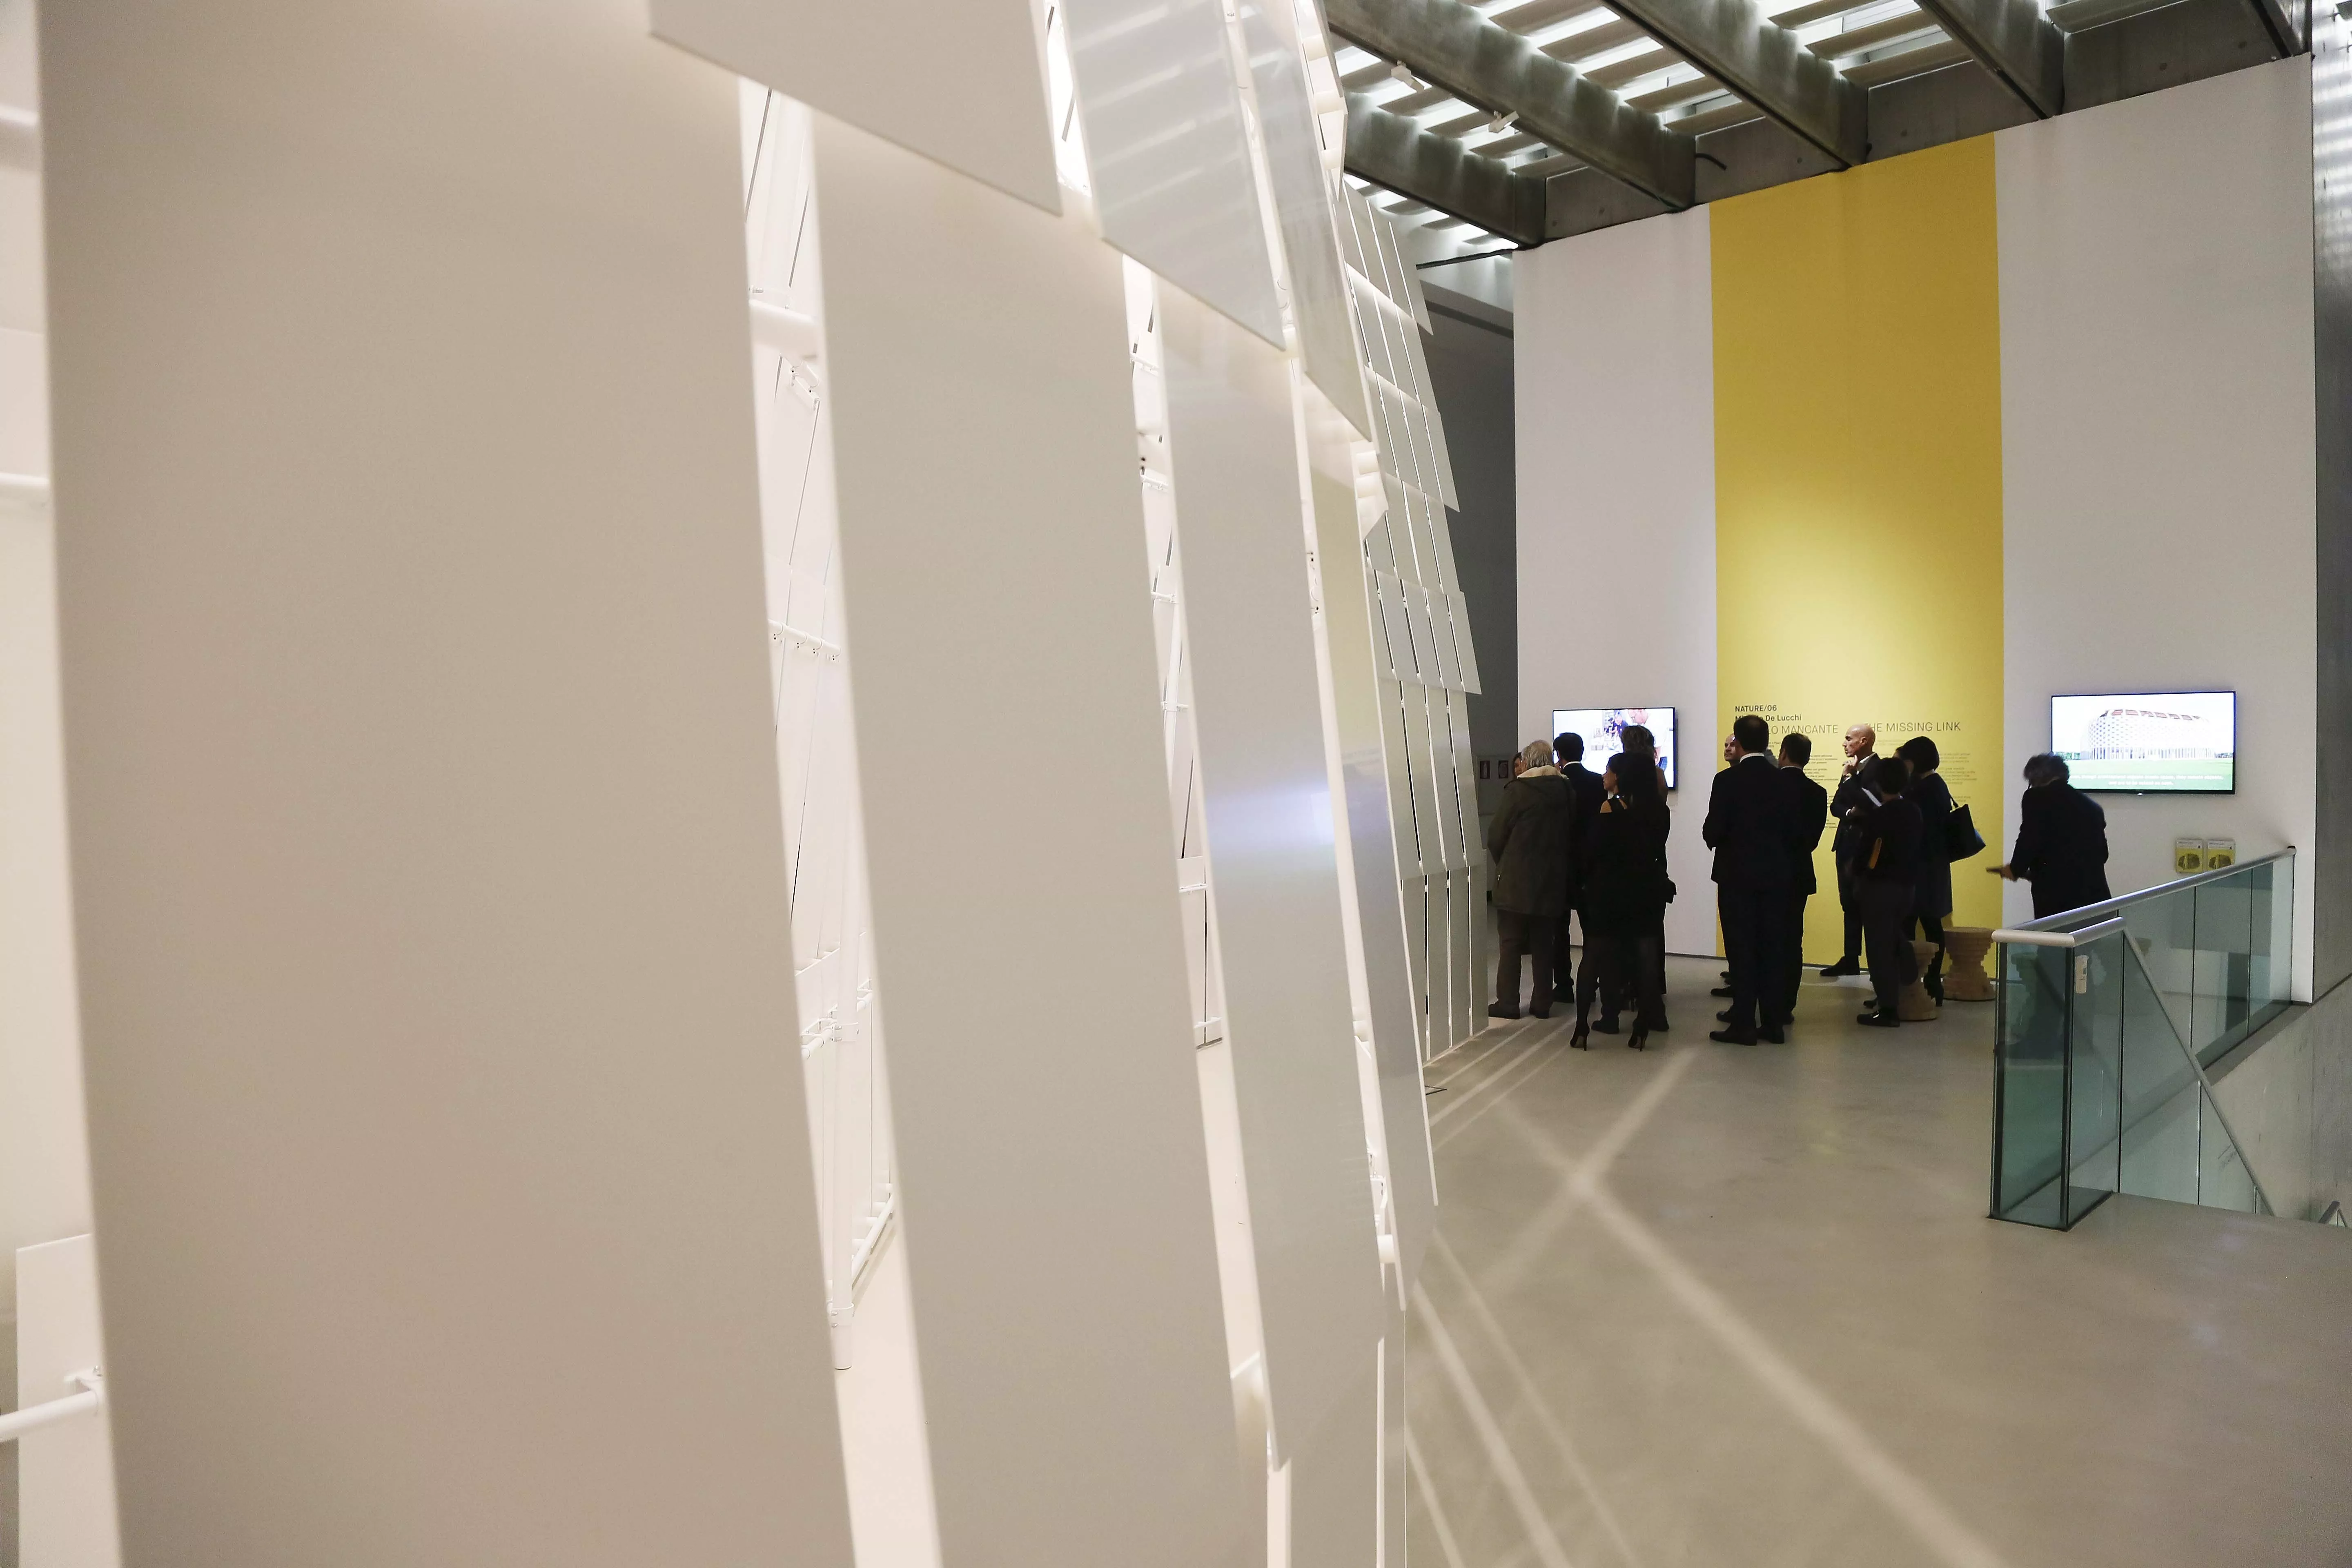 “L’Anello Mancante” by Michele De Lucchi: an installation in HIMACS at MAXXI museum